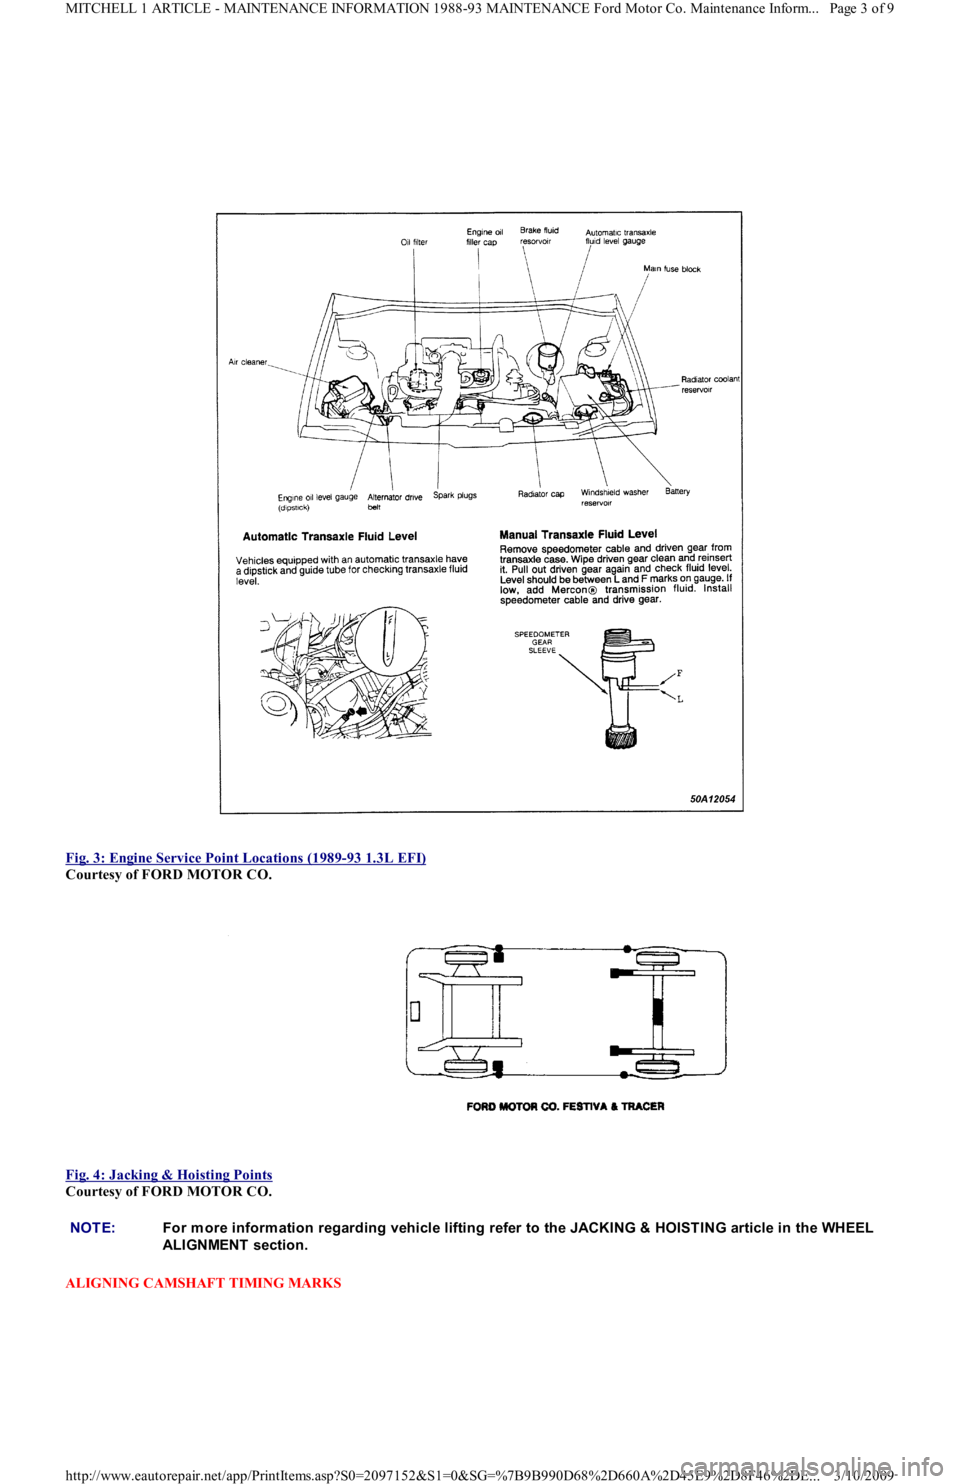 FORD FESTIVA 1991  Service Manual  
Fig. 3: Engine Service Point Locations (1989
-93 1.3L EFI) 
Courtesy of FORD MOTOR CO. 
 
Fig. 4: Jacking & Hoisting Points
 
Courtesy of FORD MOTOR CO. 
ALIGNING CAMSHAFT TIMING MARKS 
NOTE:For m o